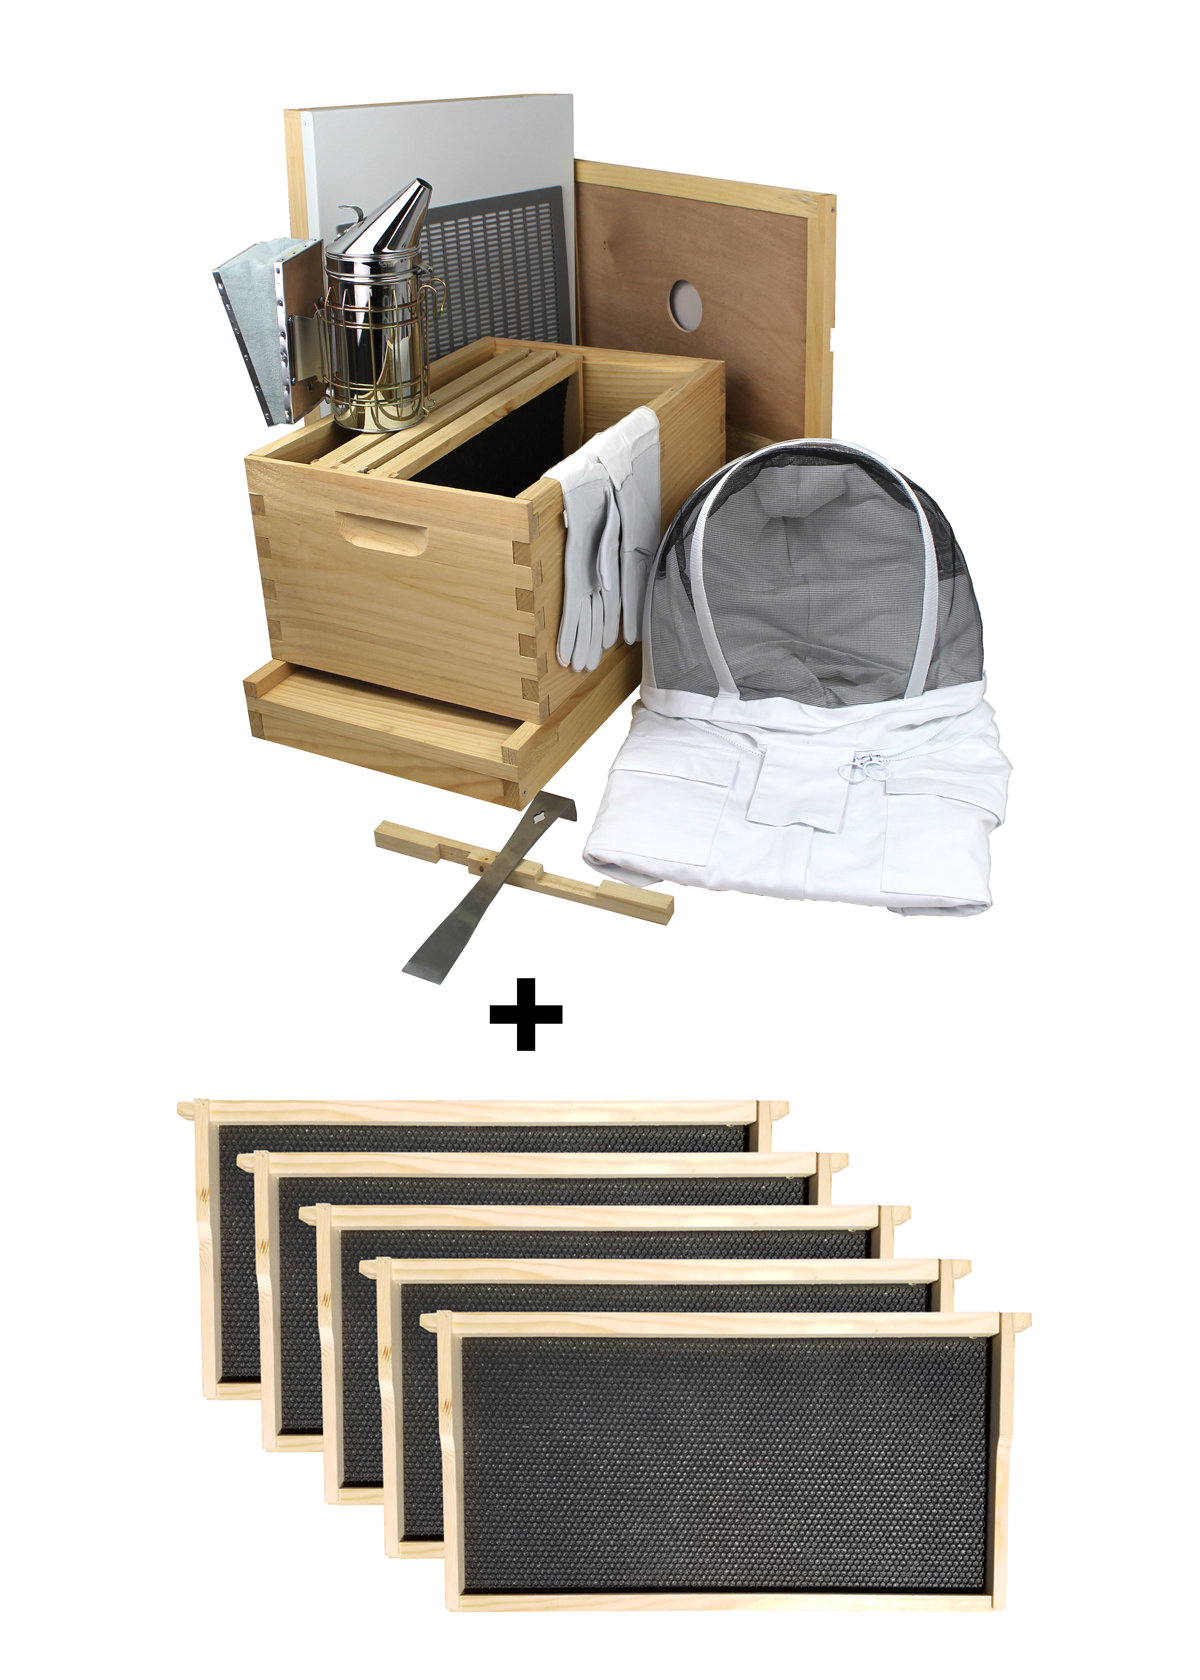 Busy Bees 'N' More Amish Made 8 Frame Beehive Starter Kit With 1 Deep Bee Box & Accessories Starter Kit With 5 More Frames